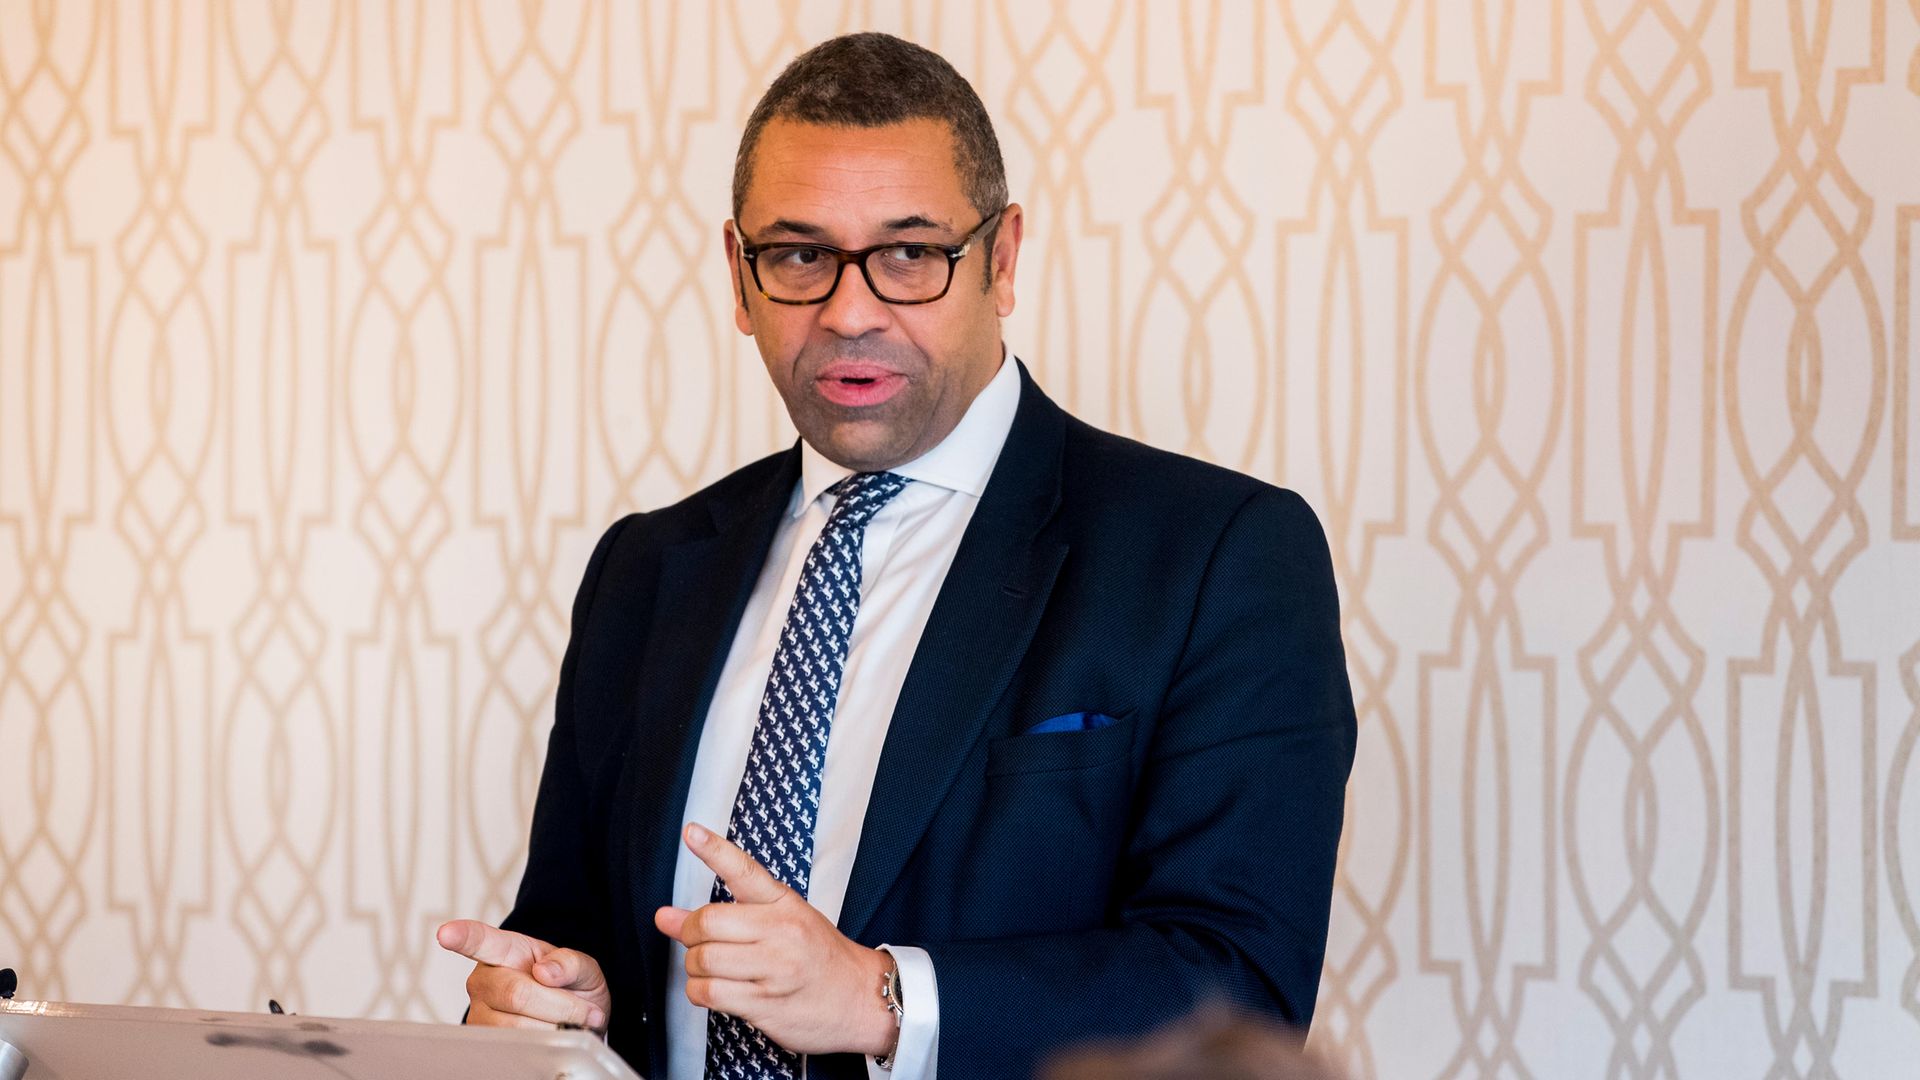 James Cleverly said the international community is “pulling together” to restore permanent peace in the region - Credit: PA